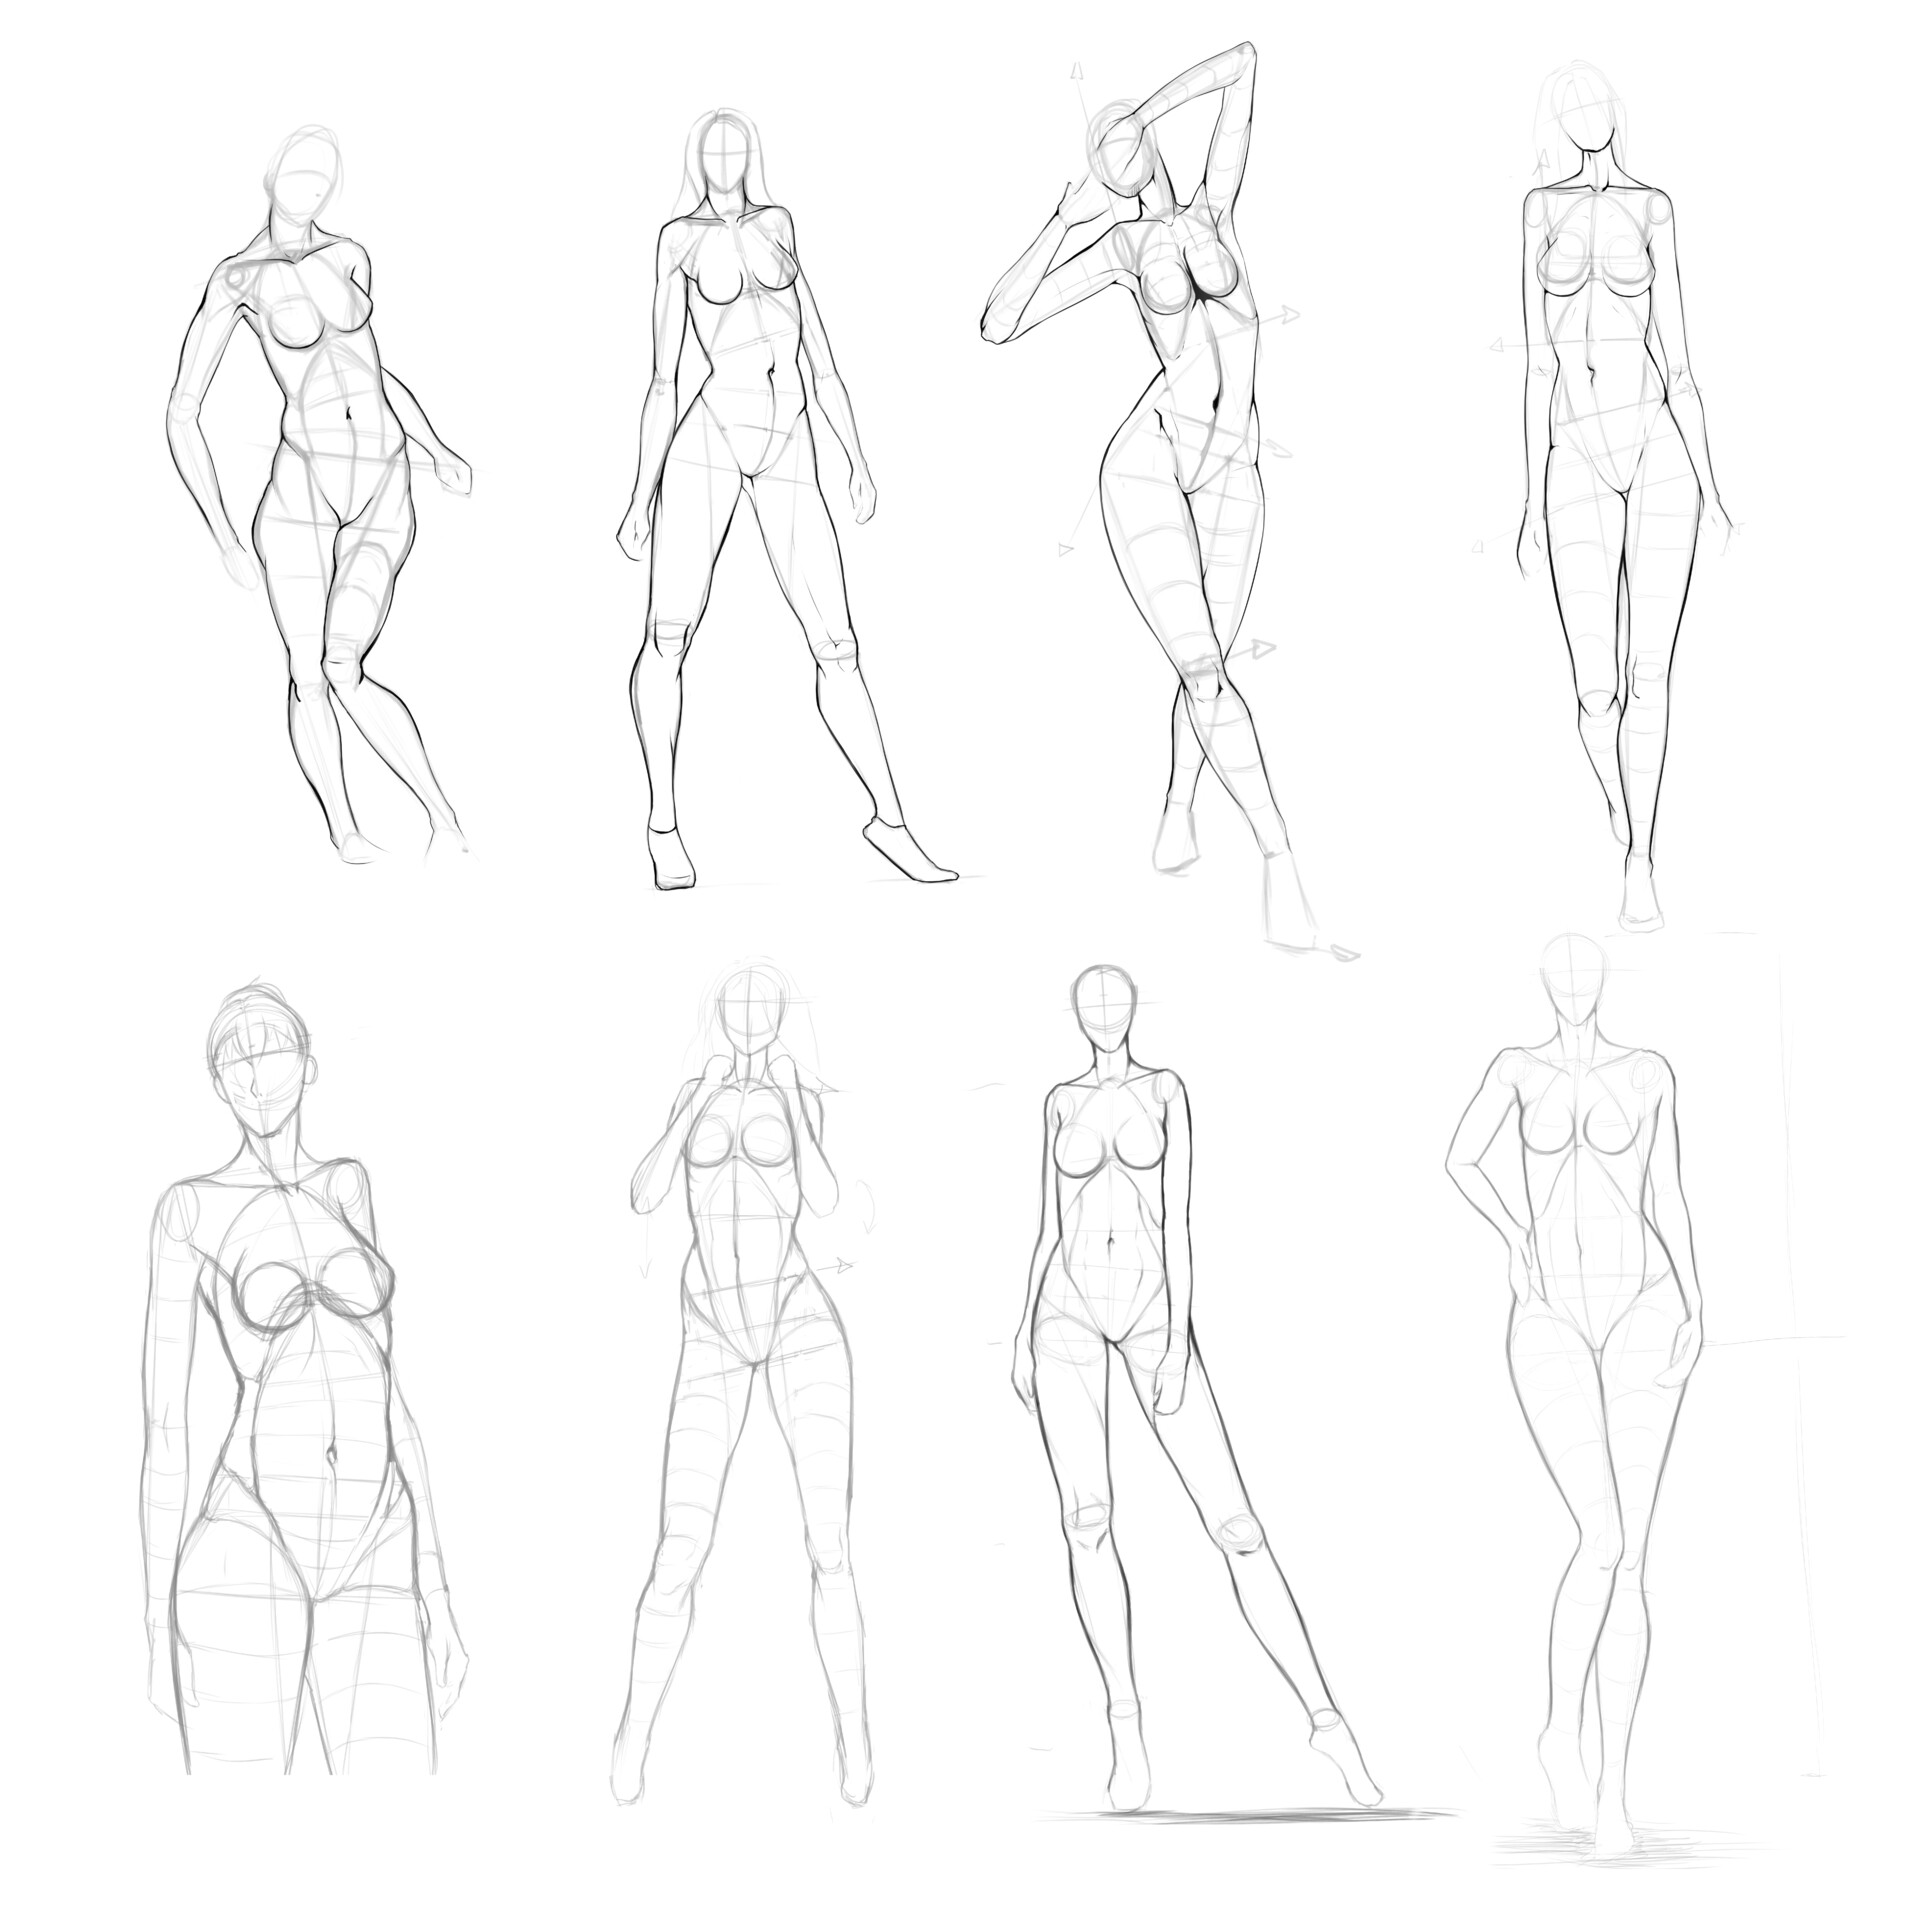 could you give anatomy advice on male/female? how did you learn to  correctly draw proportions and stuff? thank you! – universeartist